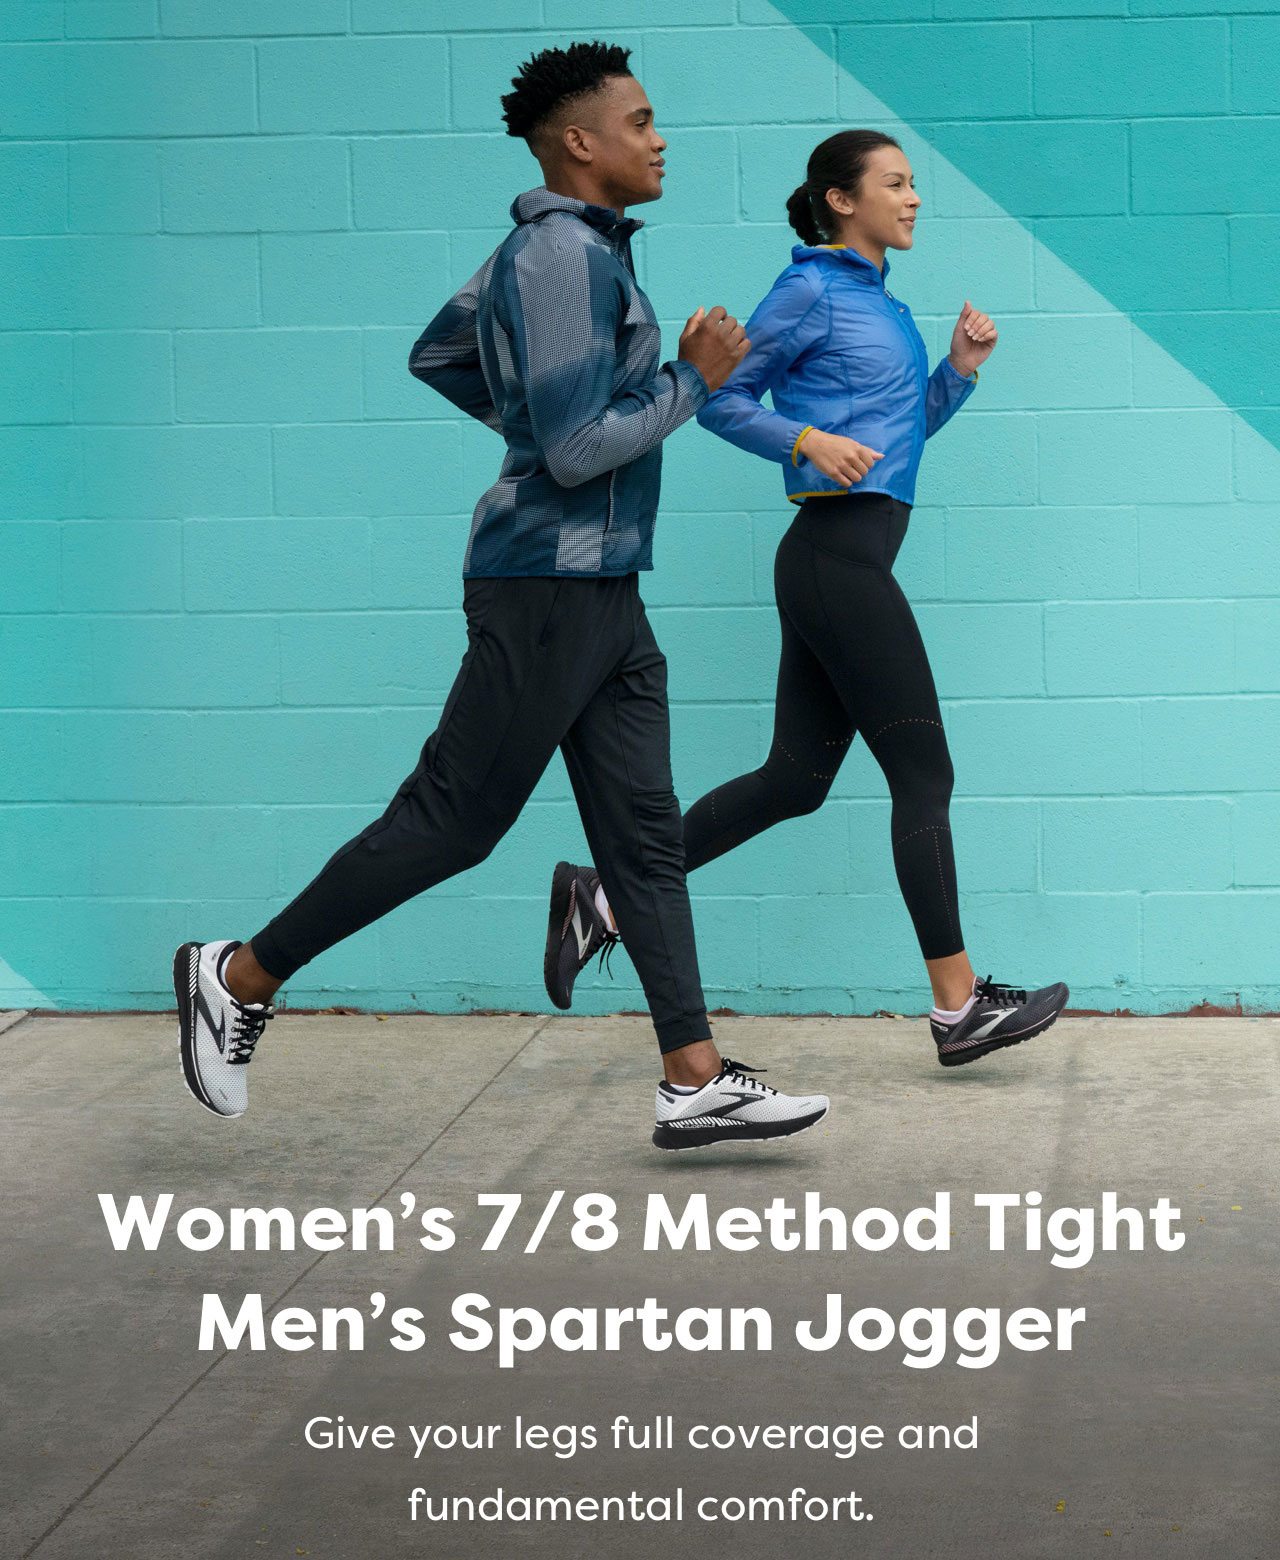 Women's 7/8 Method Tight Men's Spartan Jogger - Give your legs full coverage and fundamental comfort.